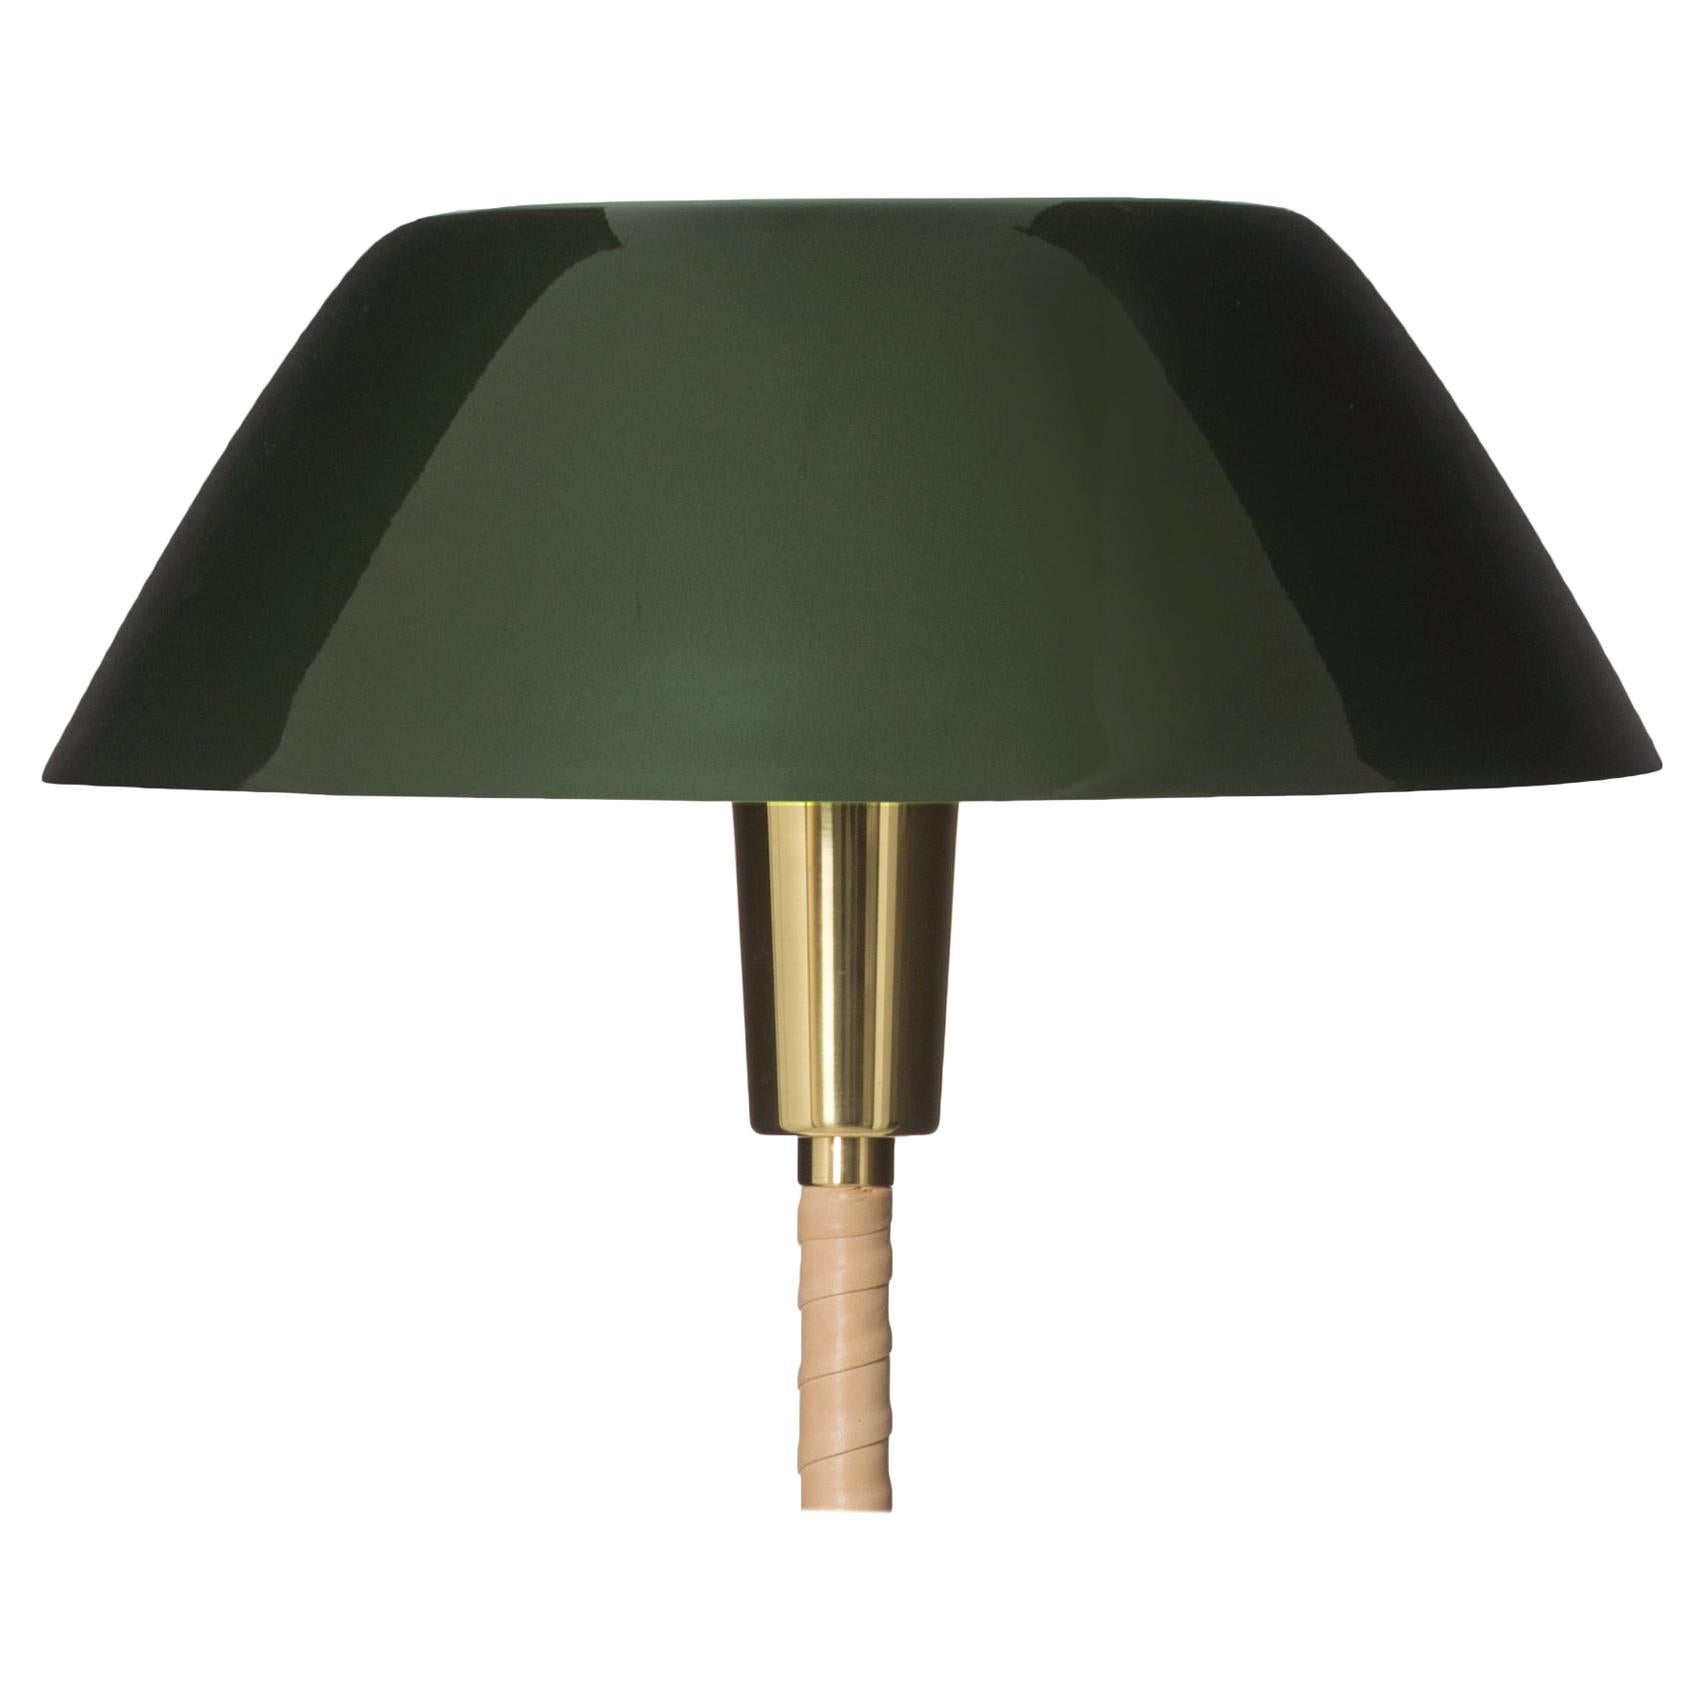 Senator floor lamp. Green. New edition.
Lisa Johansson-Pape designed the Senator table and floor lamps in circa 1947. Innolux restarted production of the iconic Senator lamps in honour of the centenary of Finland's independence.

Senator lamps’